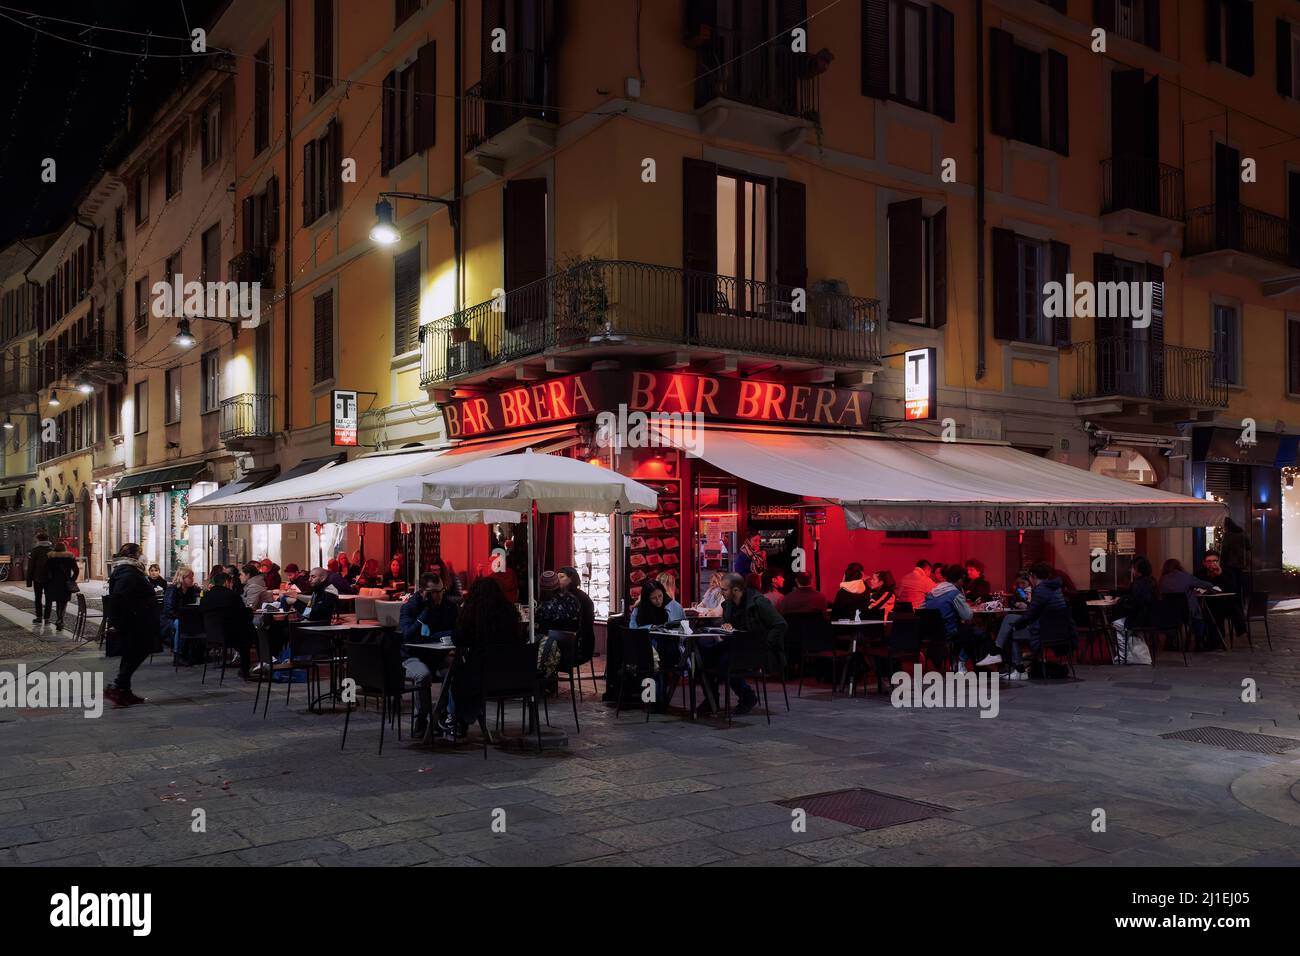 Milan, Italy night view of crowd in typical outdoor cafe restaurant with illuminated sign in Brera neighbourhood. Stock Photo